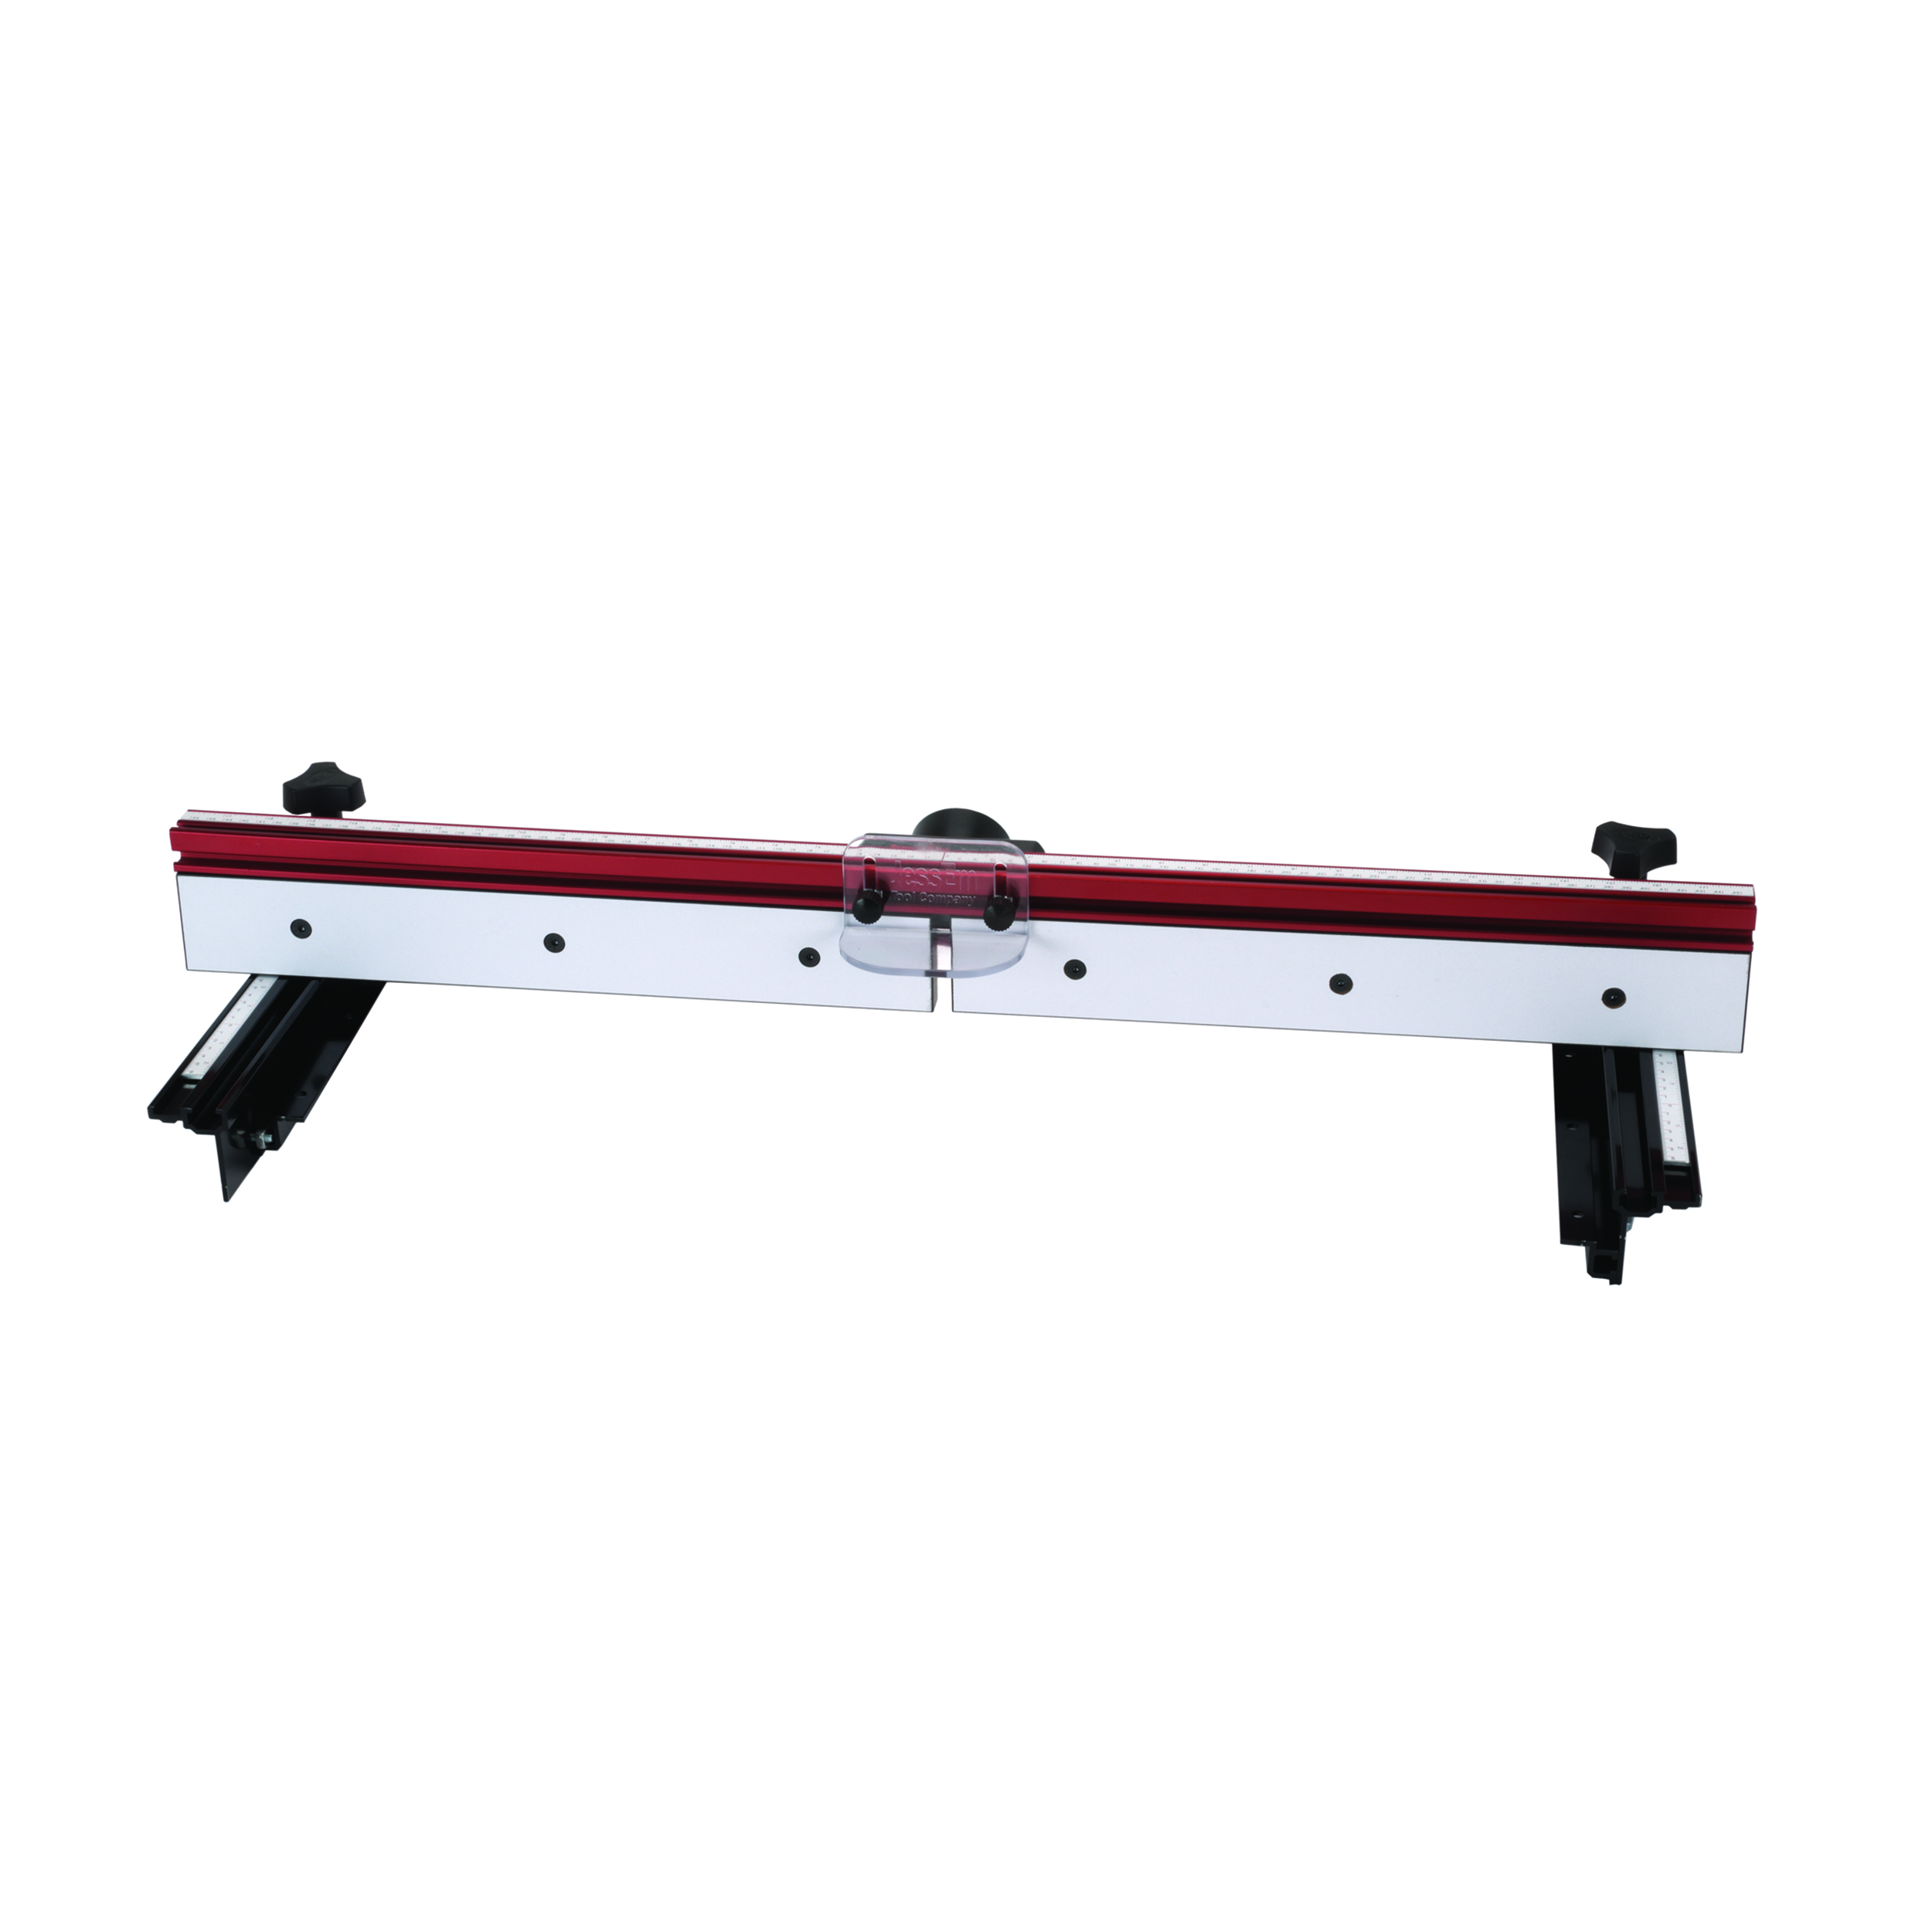 Mast-r-fence Ii Router Table Fence